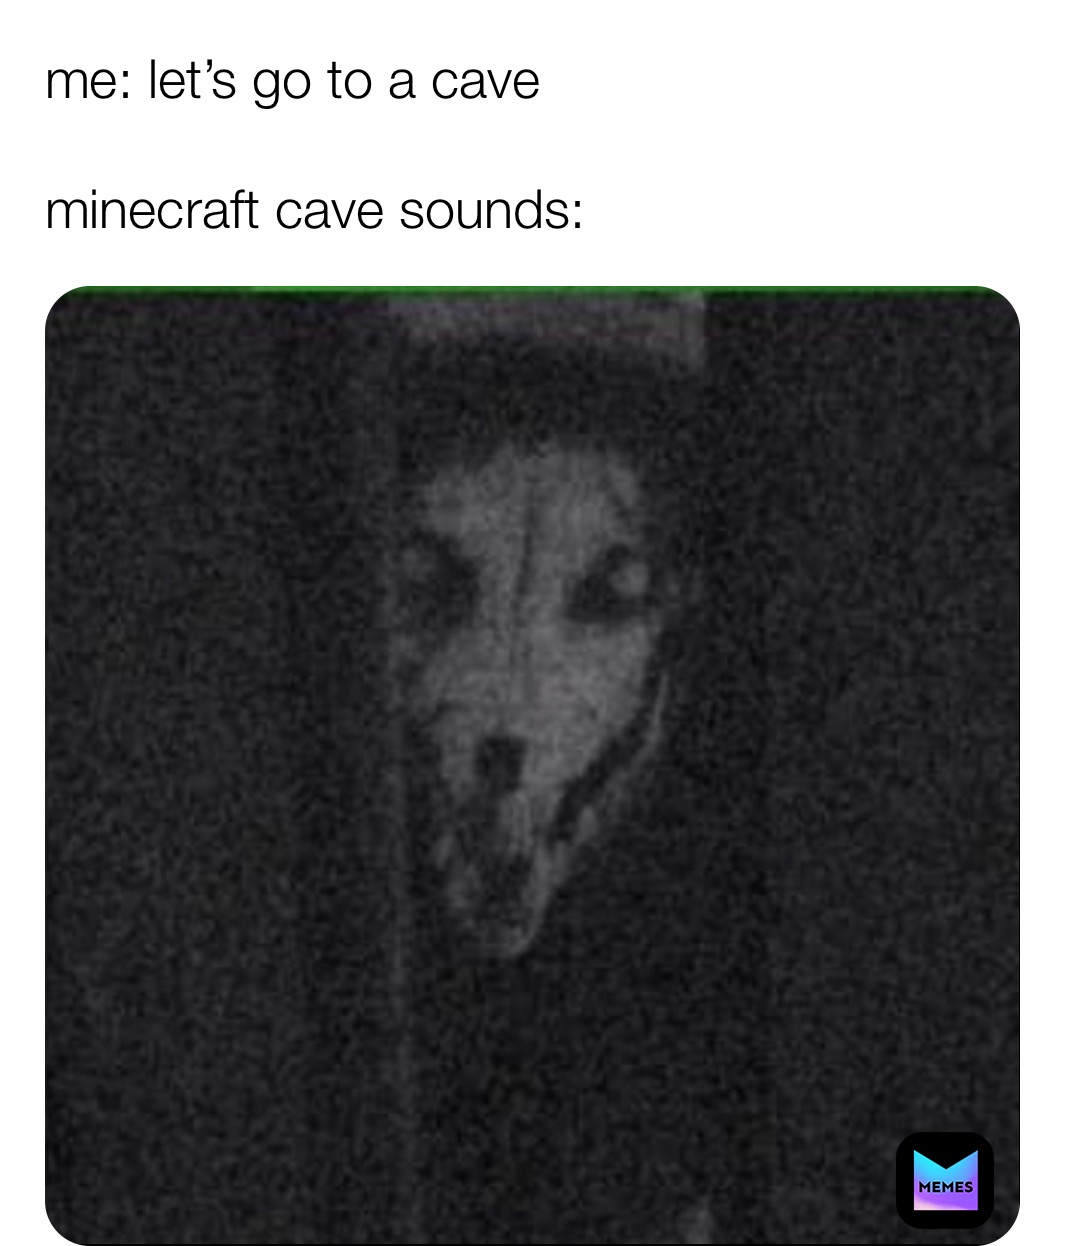 me: let’s go to a cave

minecraft cave sounds: